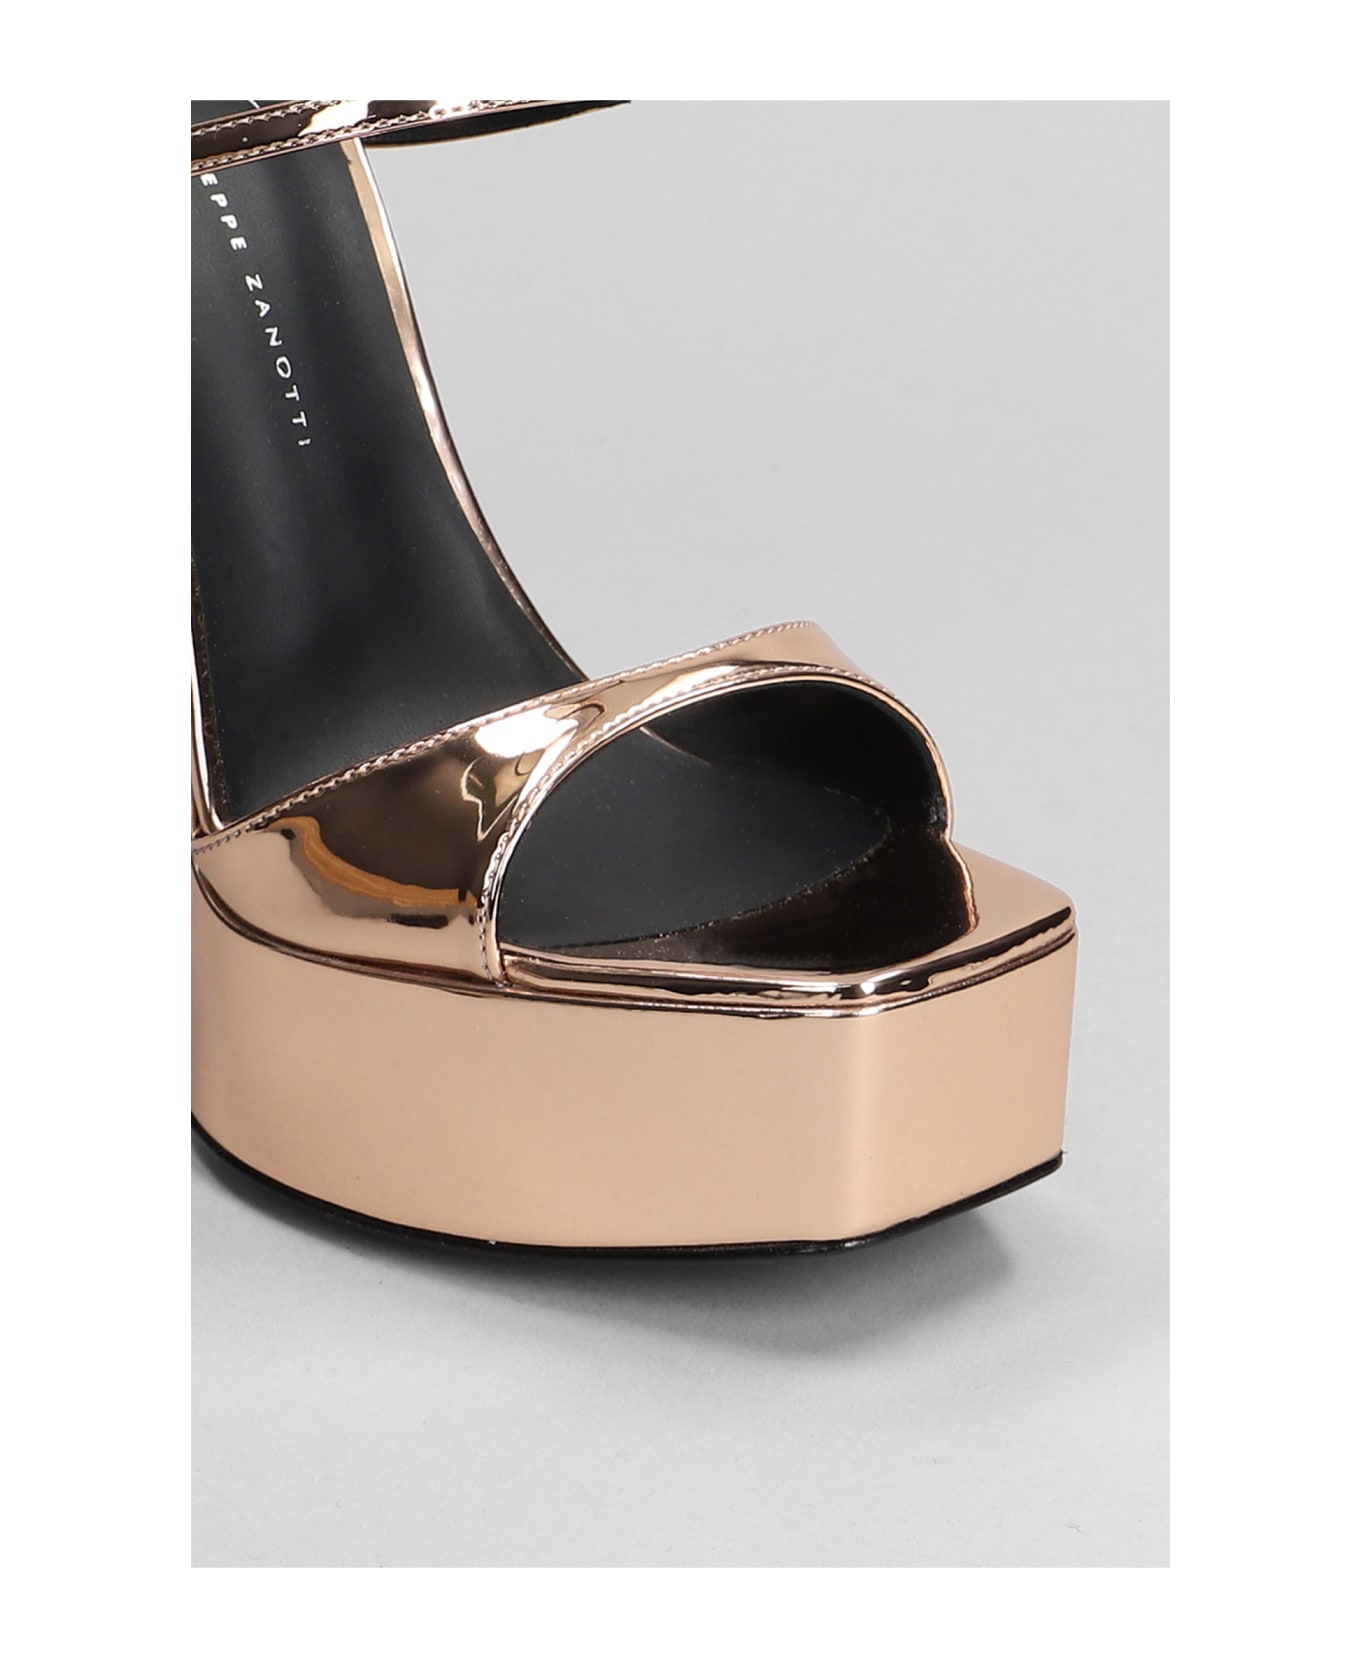 Giuseppe Zanotti Sylvy Sandals In Bronze Synthetic Leather - bronze